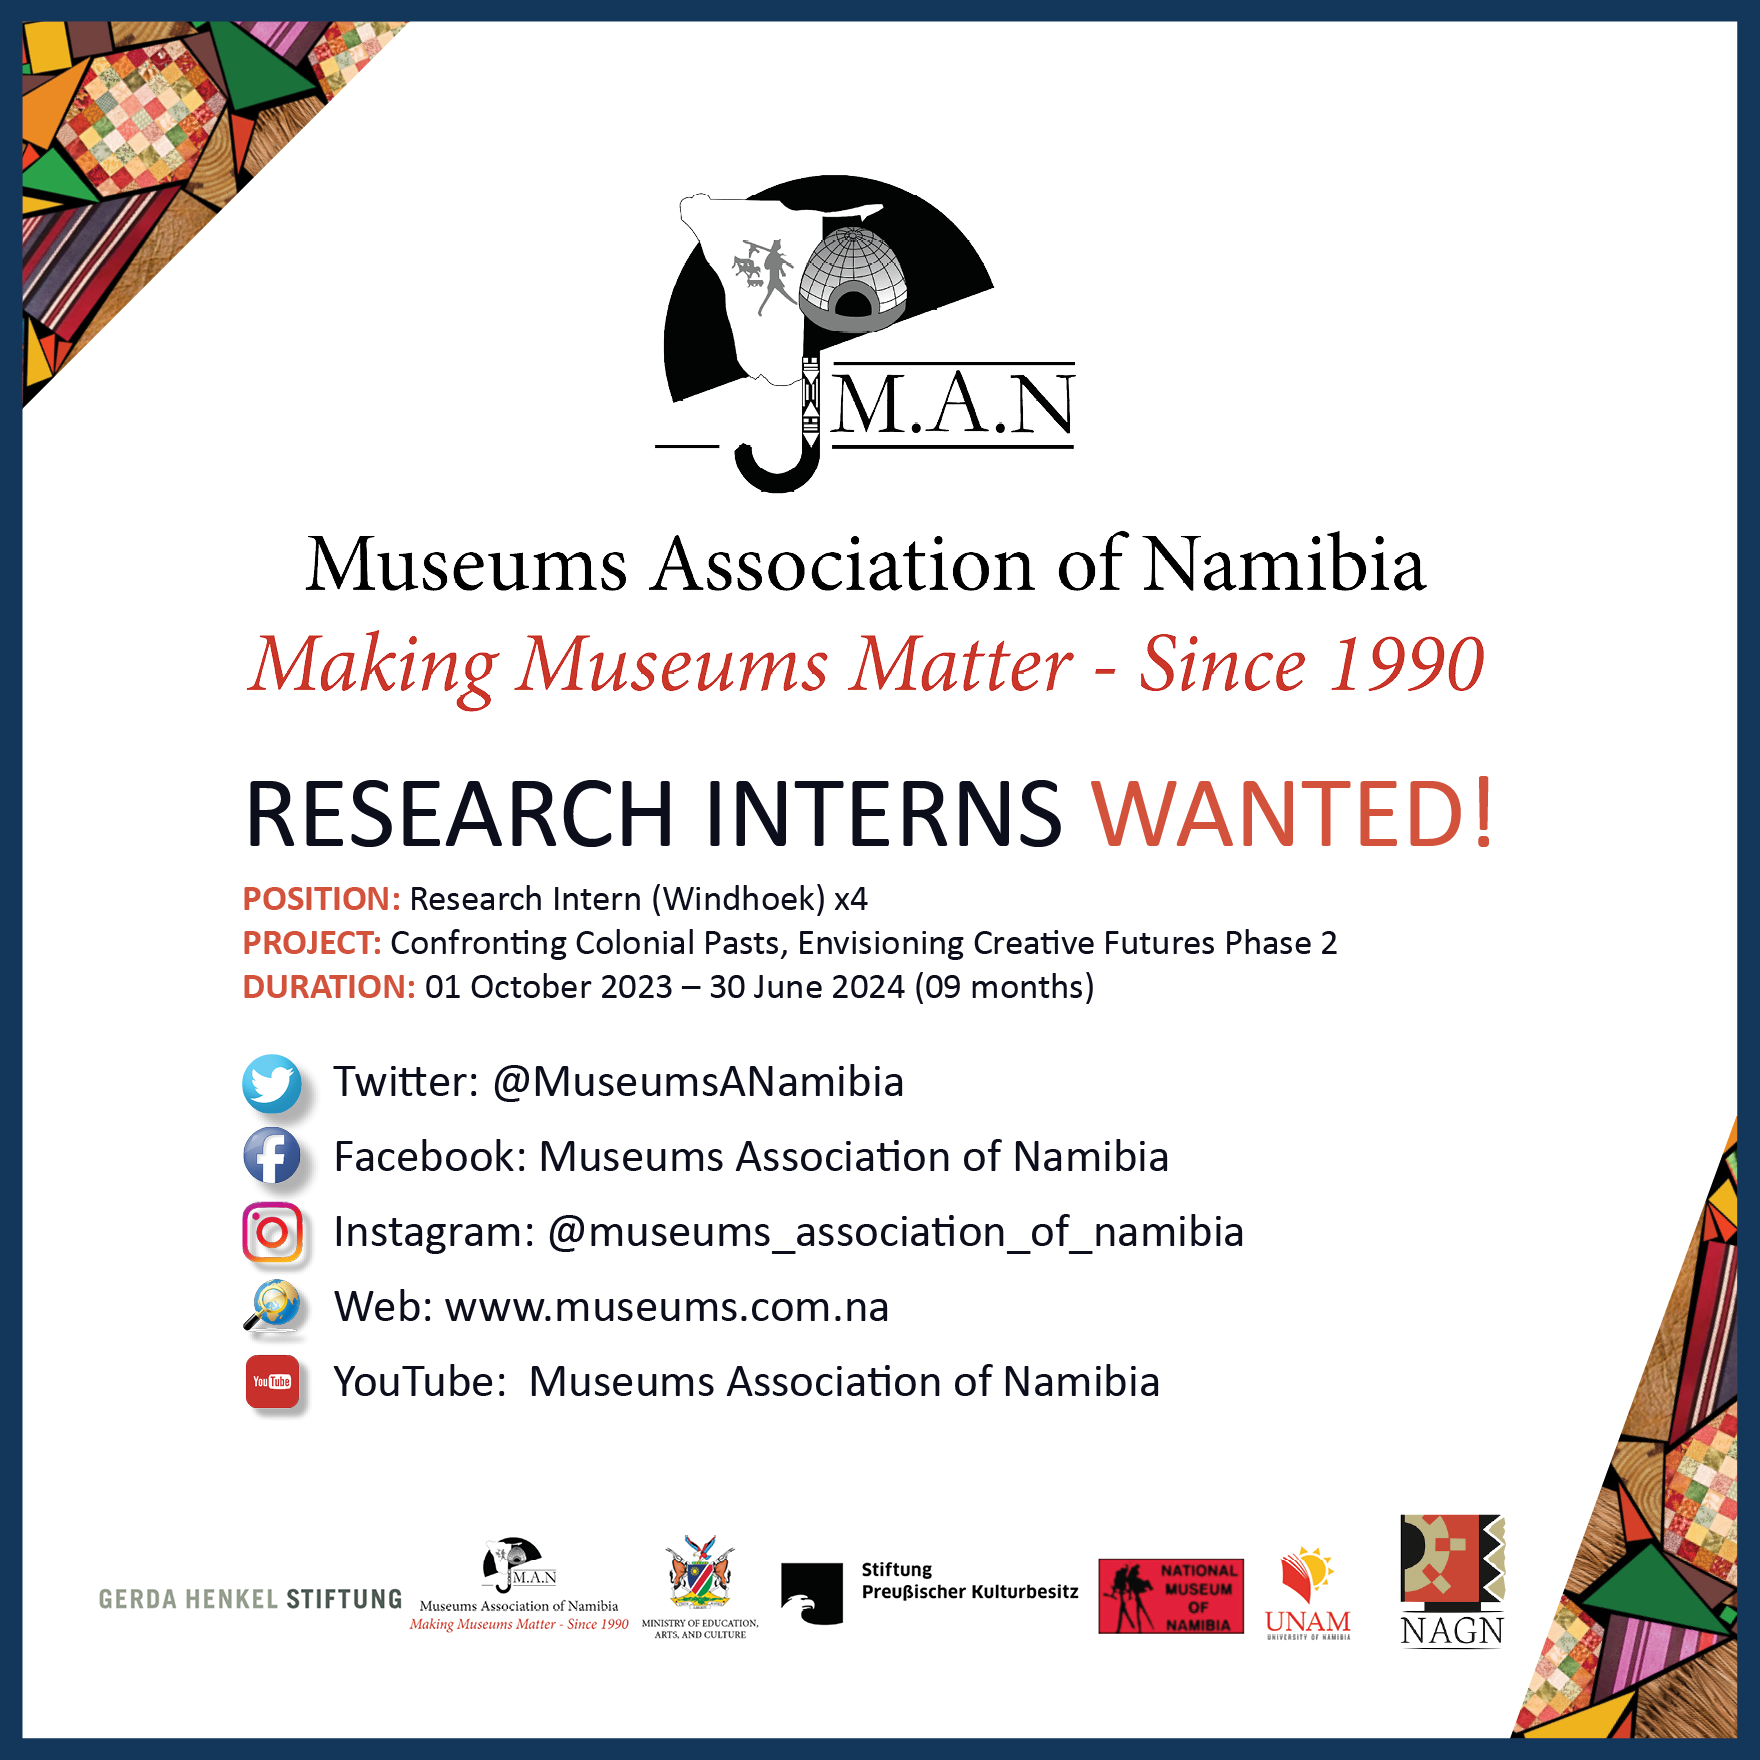 Research Interns Wanted 2023